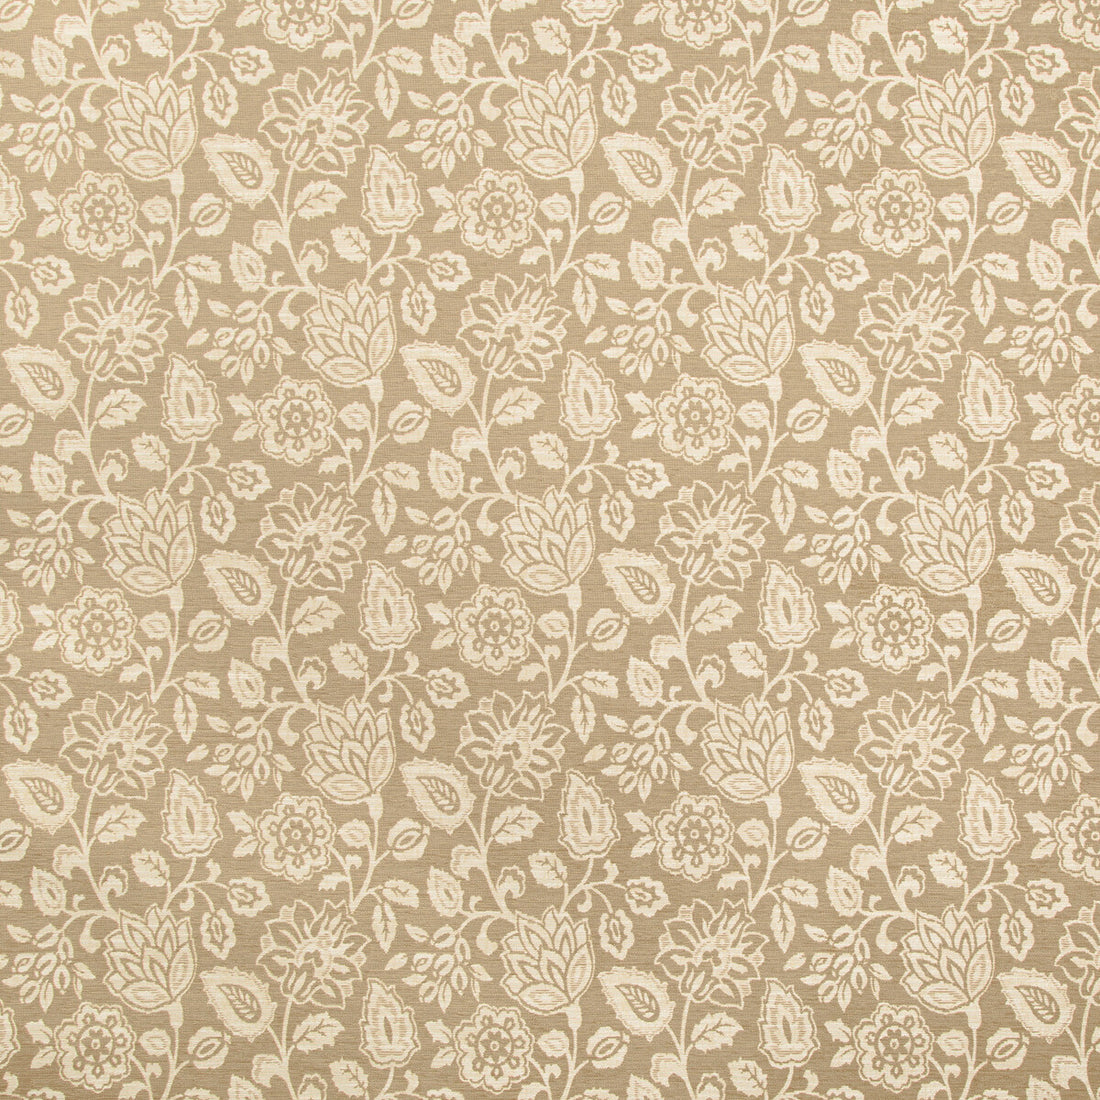 Kf Ctr fabric - pattern 35863.16.0 - by Kravet Contract in the Gis Crypton collection